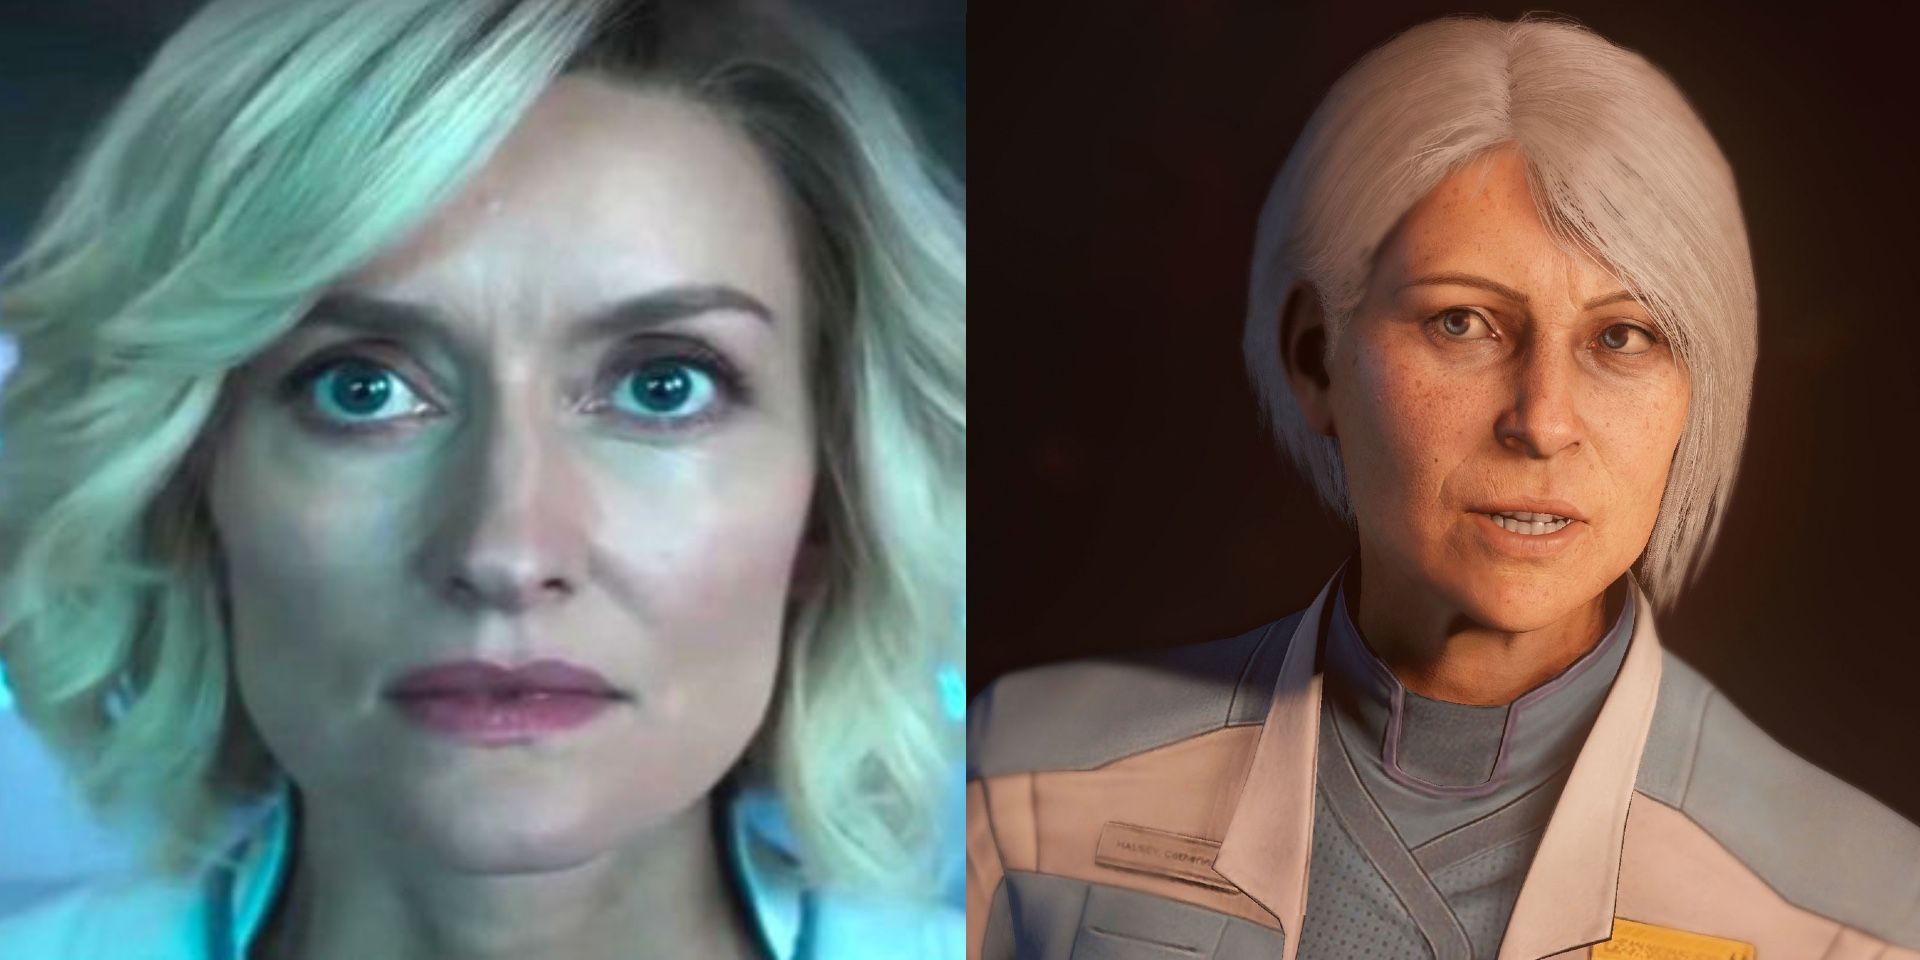 Dr. Halsey in the Halo TV show and game